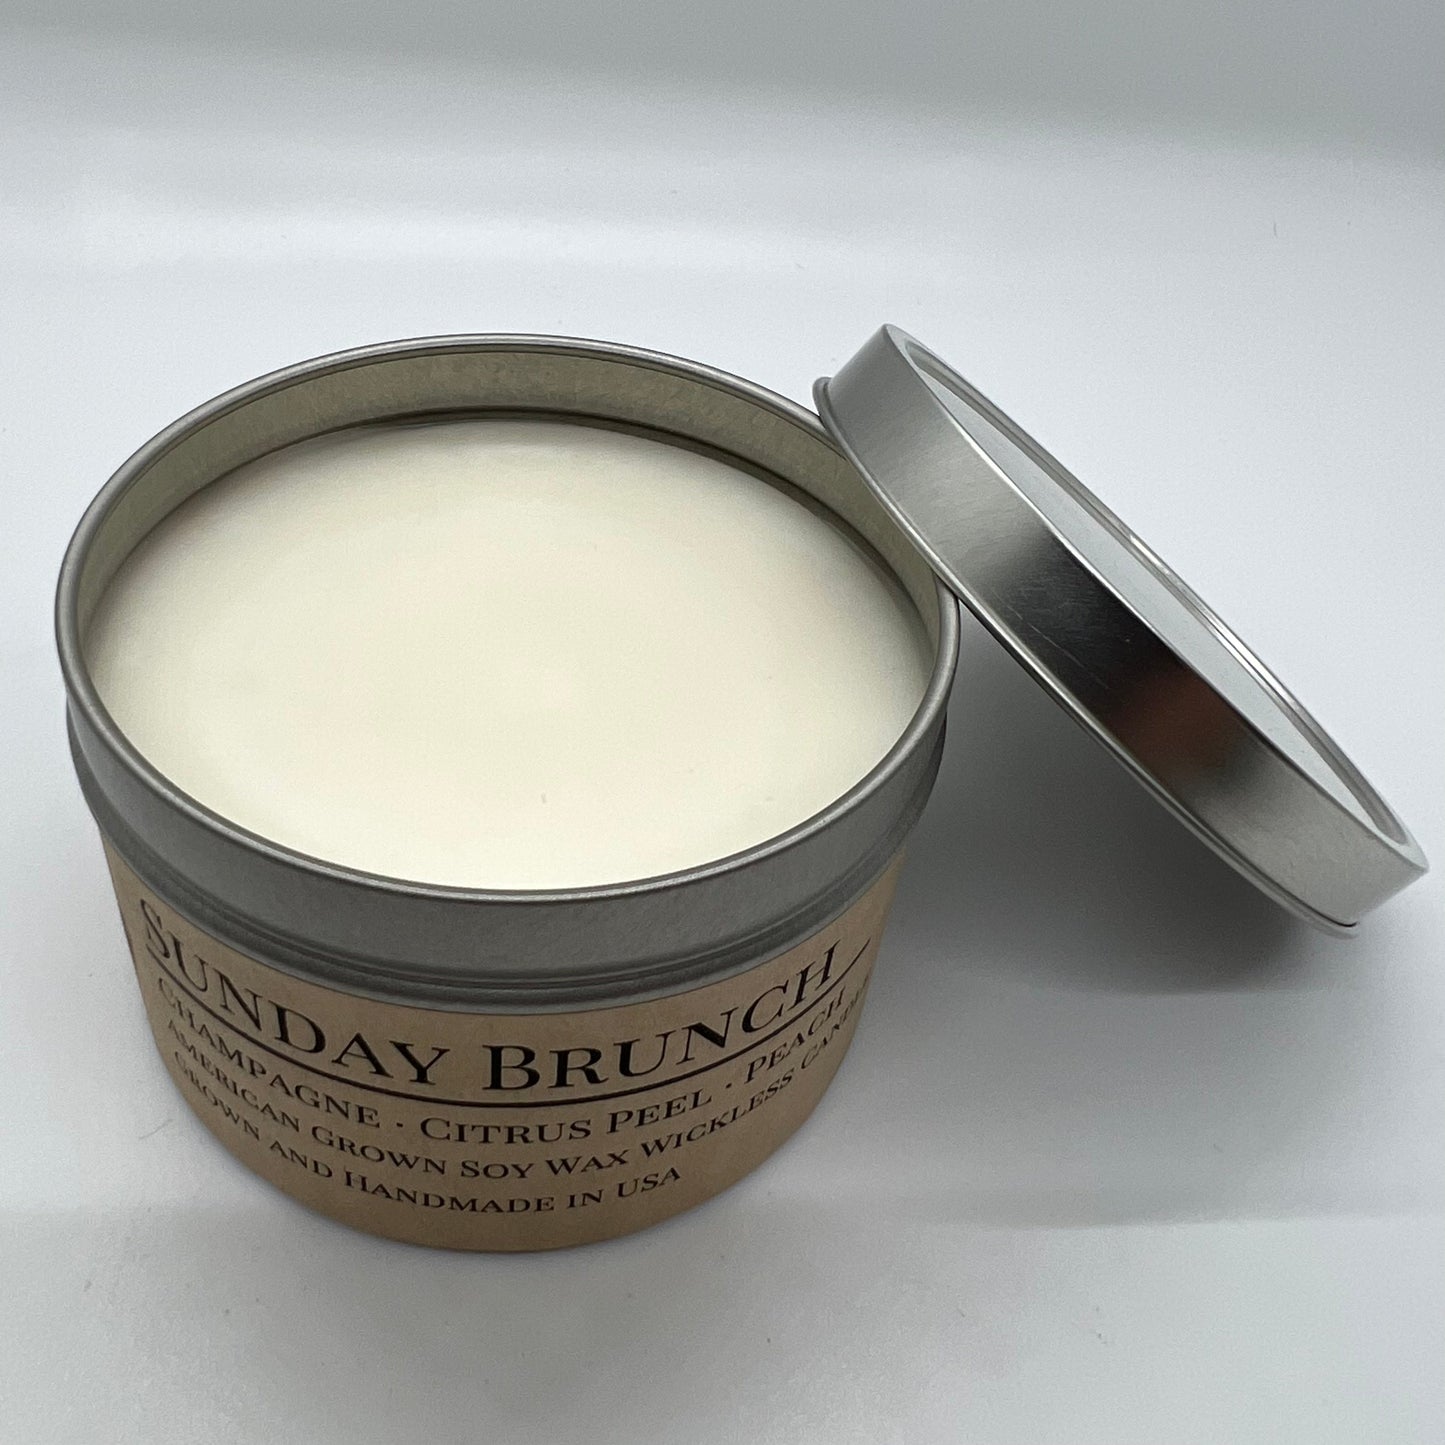 Sunday Brunch Soy Wickless Candle Melt | 8 oz Travel Tin